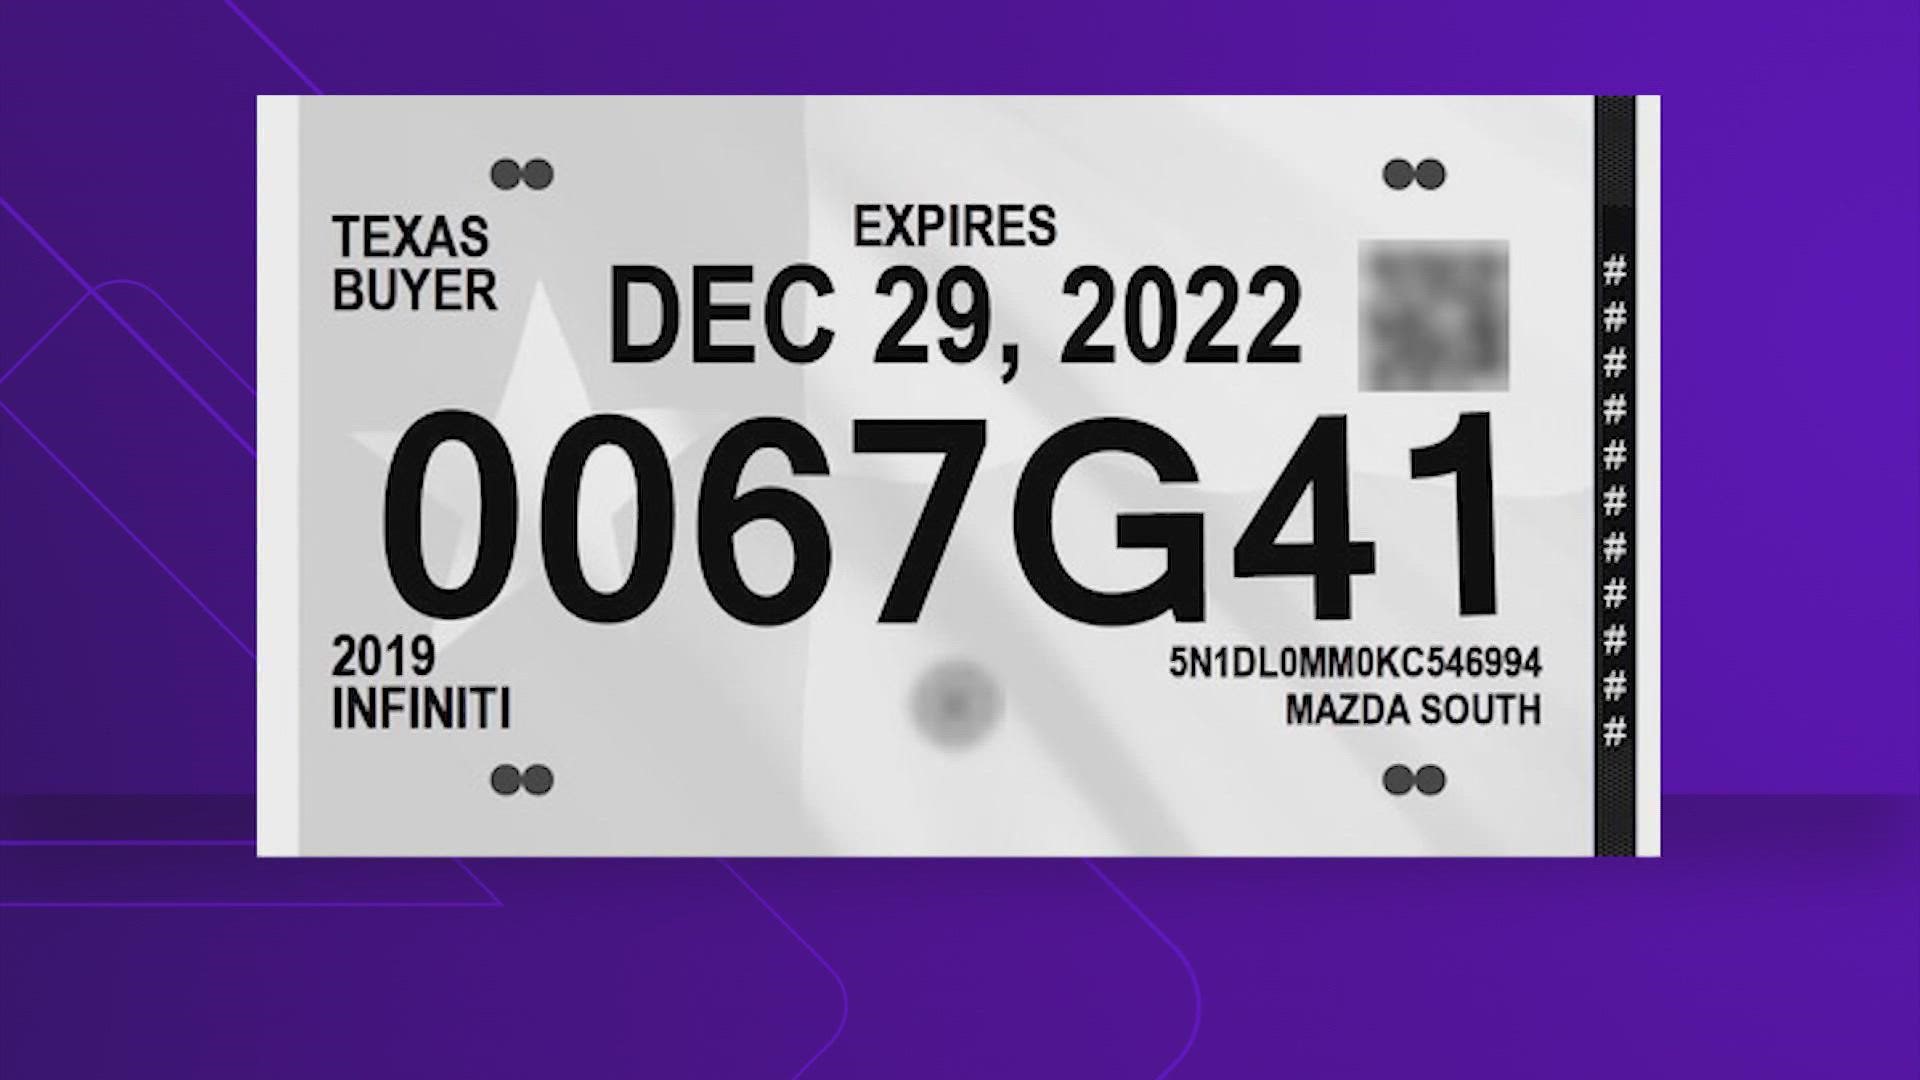 The Texas DMV revealed its redesigned tags with new security features in an effort to fight counterfeit tags.